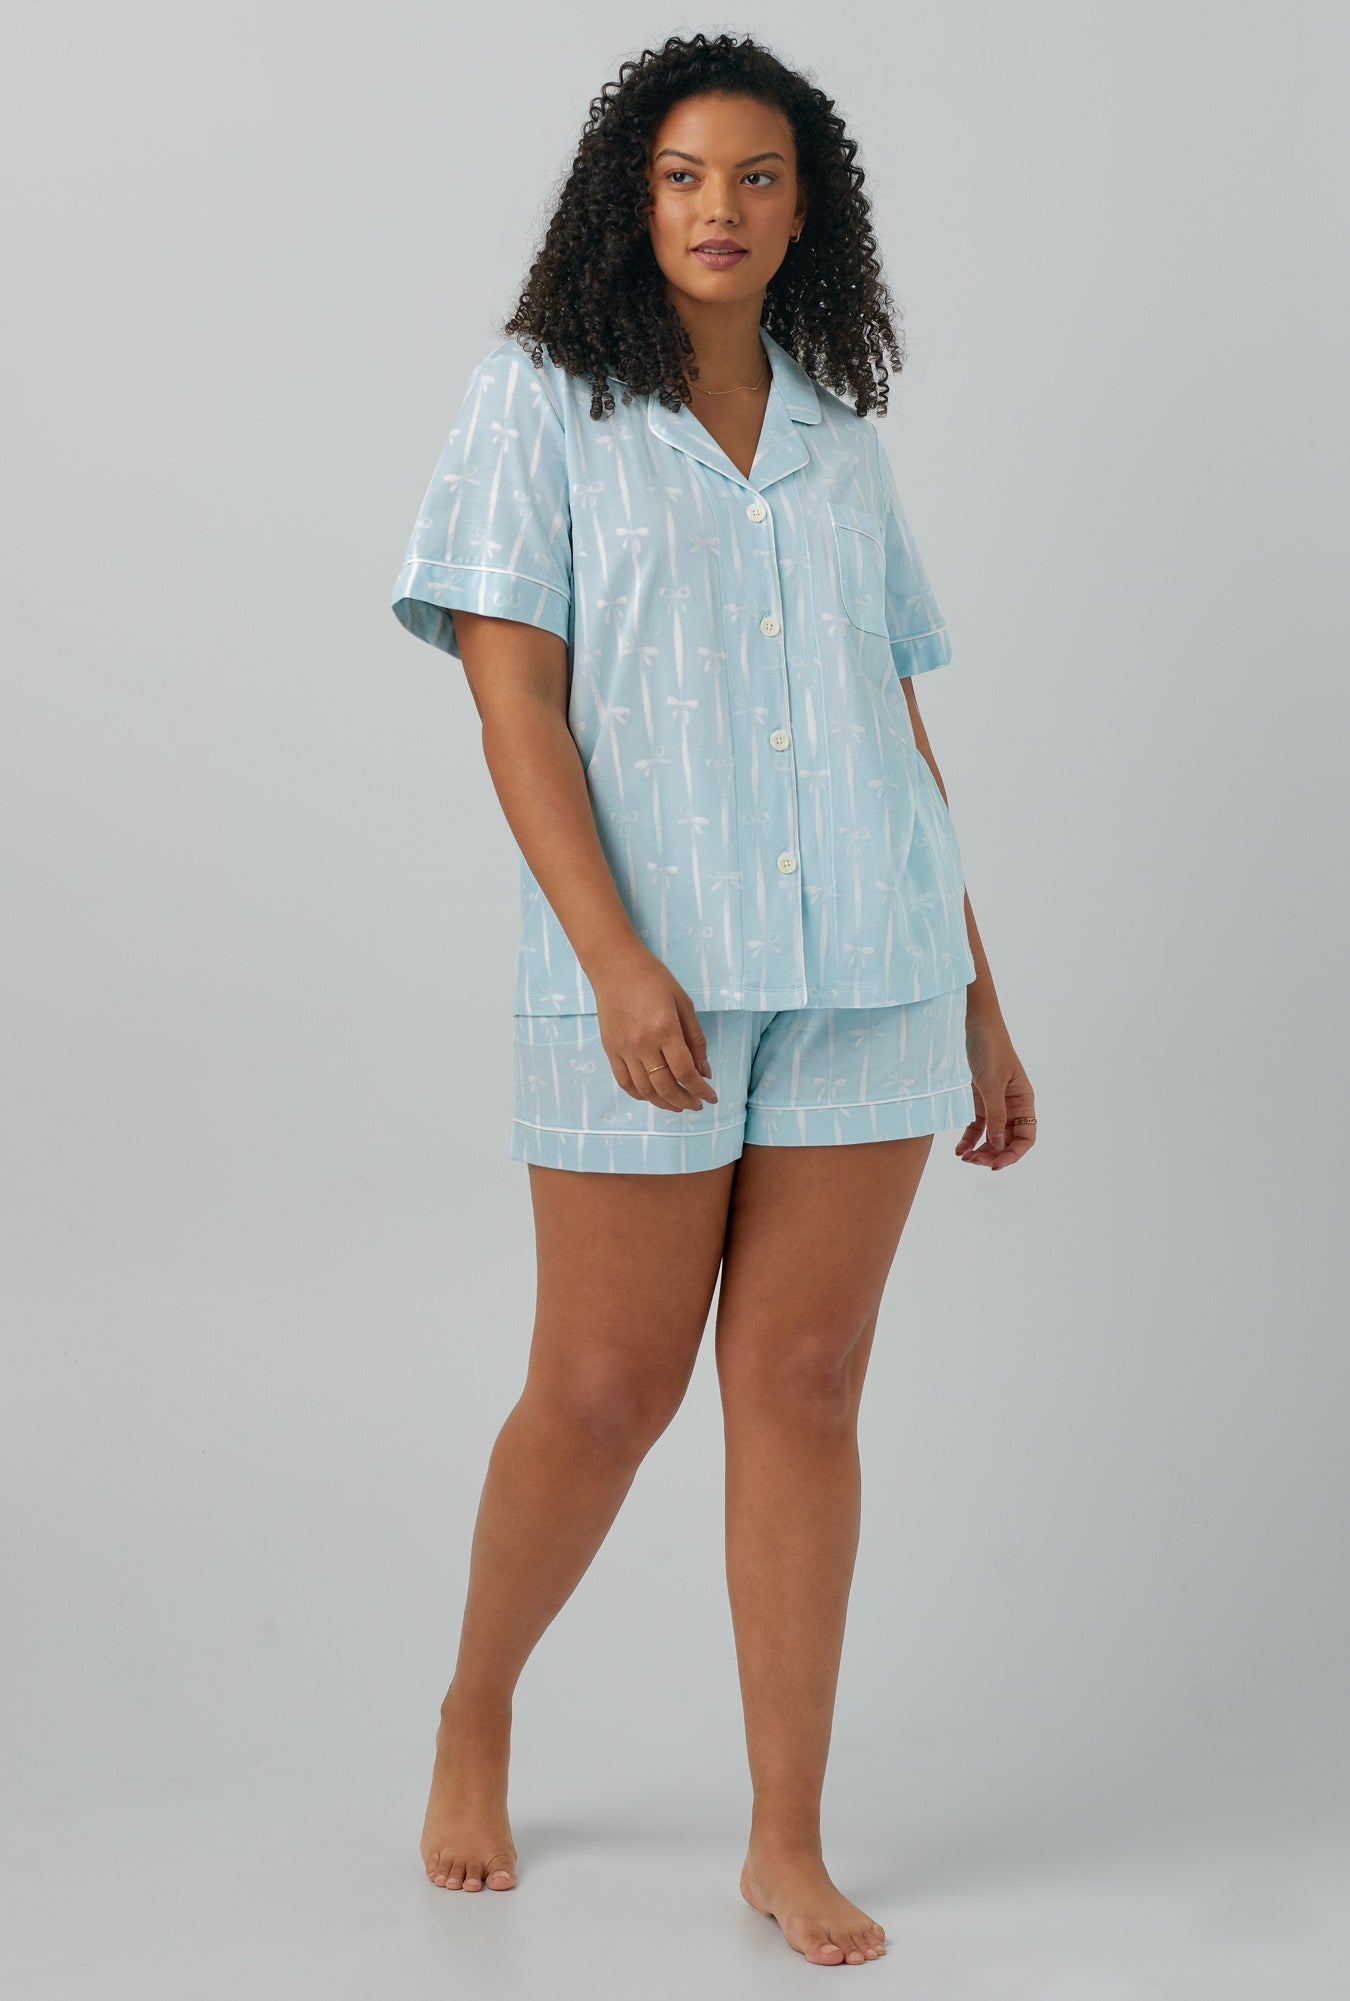 A lady wearing Short Sleeve Classic Shorty Stretch Jersey PJ Set with tying the knot print